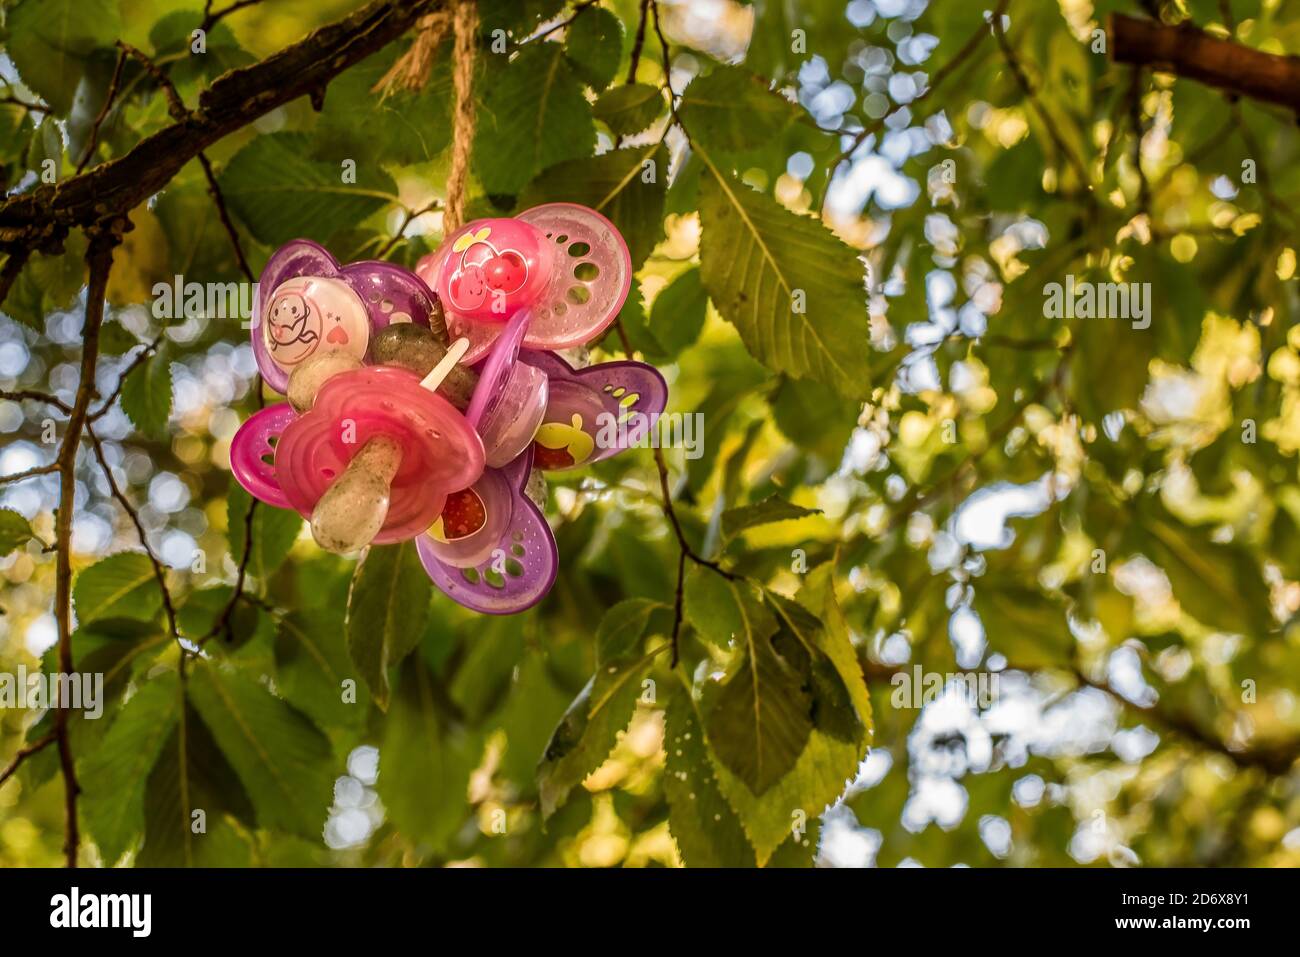 children have left their colourful pacifiers hanging in a tree wiith green leaves, Jaegerspris, Denmark, October 10, 2020 Stock Photo